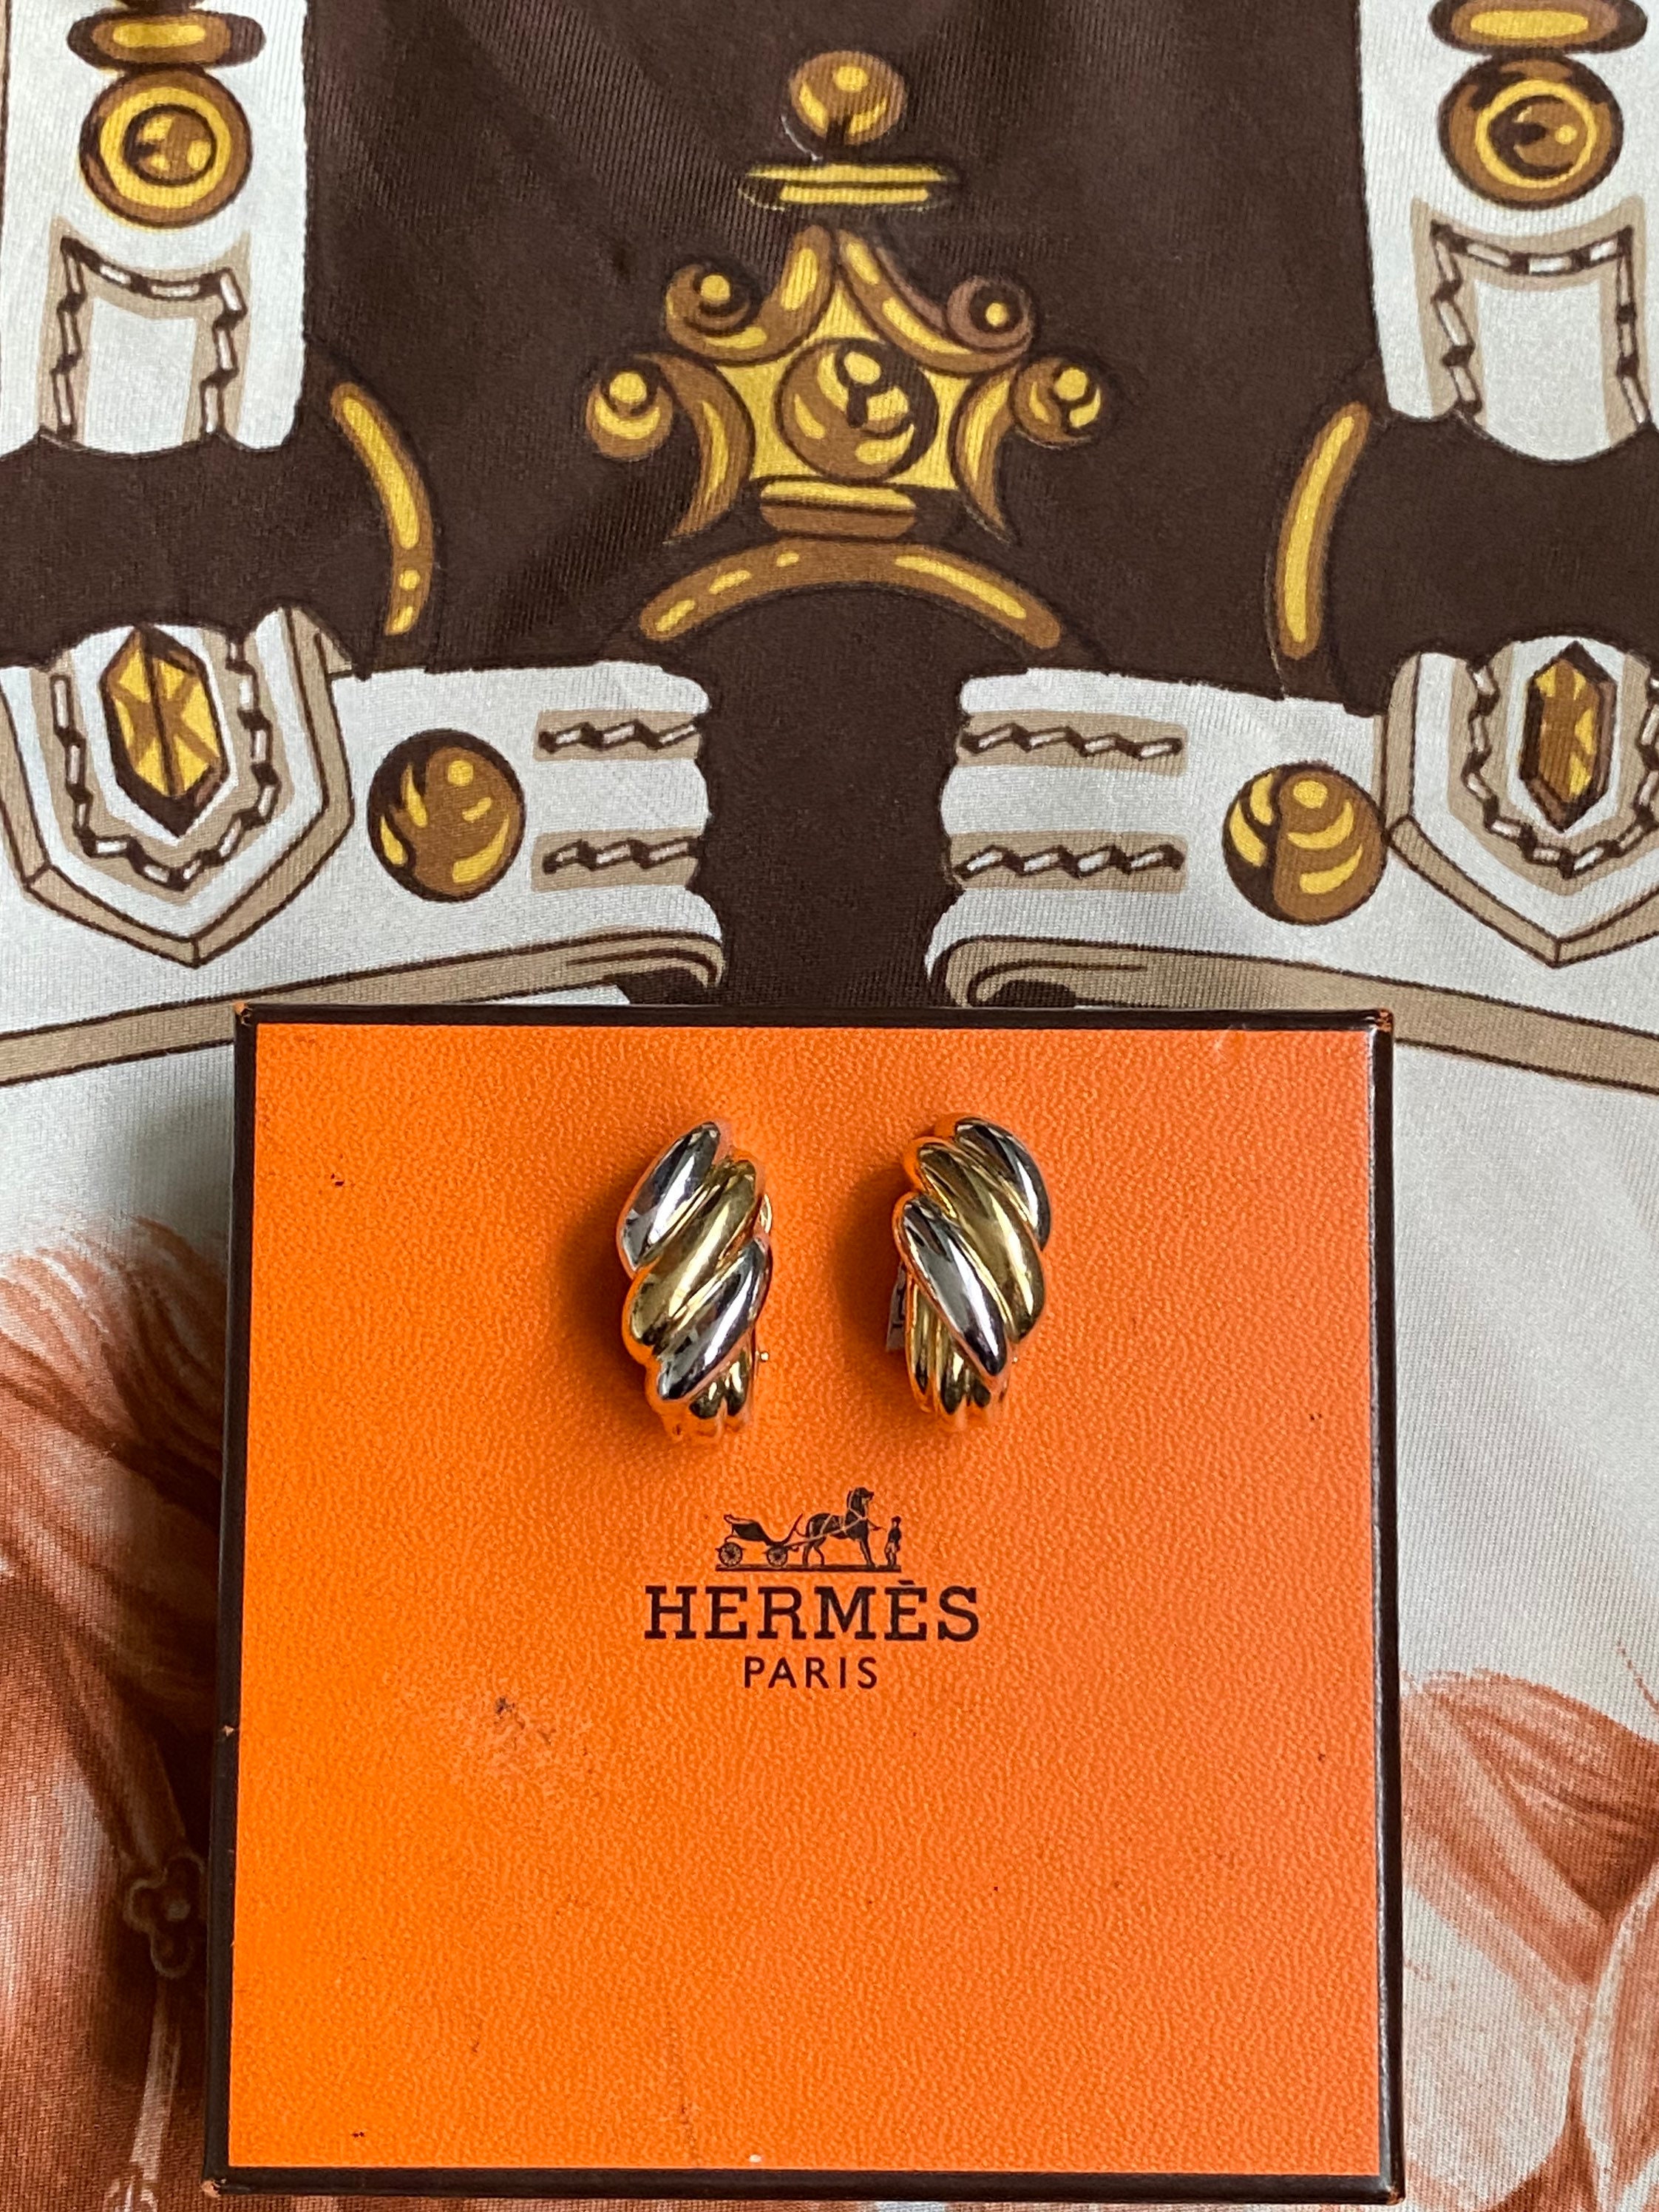 HERMES Medor Earrings Gold Silver Accessory Vintage Authentic 